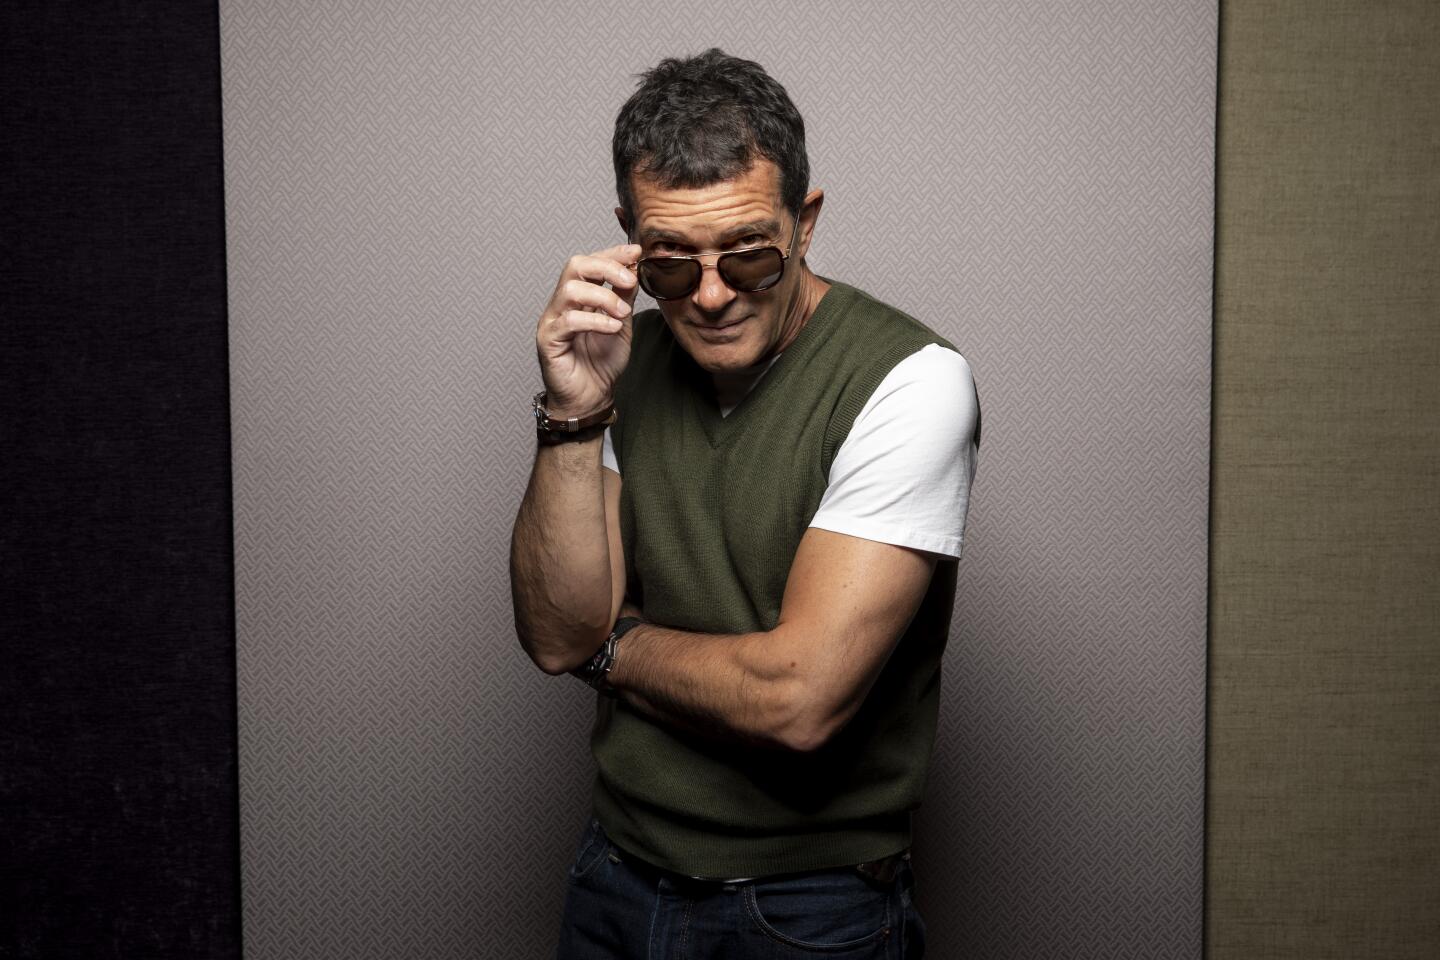 TORONTO, ONT., CAN -- SEPTEMBER 09, 2019-- Actor Antonio Banderas, from the film "The Laundromat," photographed in the L.A. Times Photo Studio at the Toronto International Film Festival, in Toronto, Ont., Canada on September 09, 2019. (Jay L. Clendenin / Los Angeles Times)